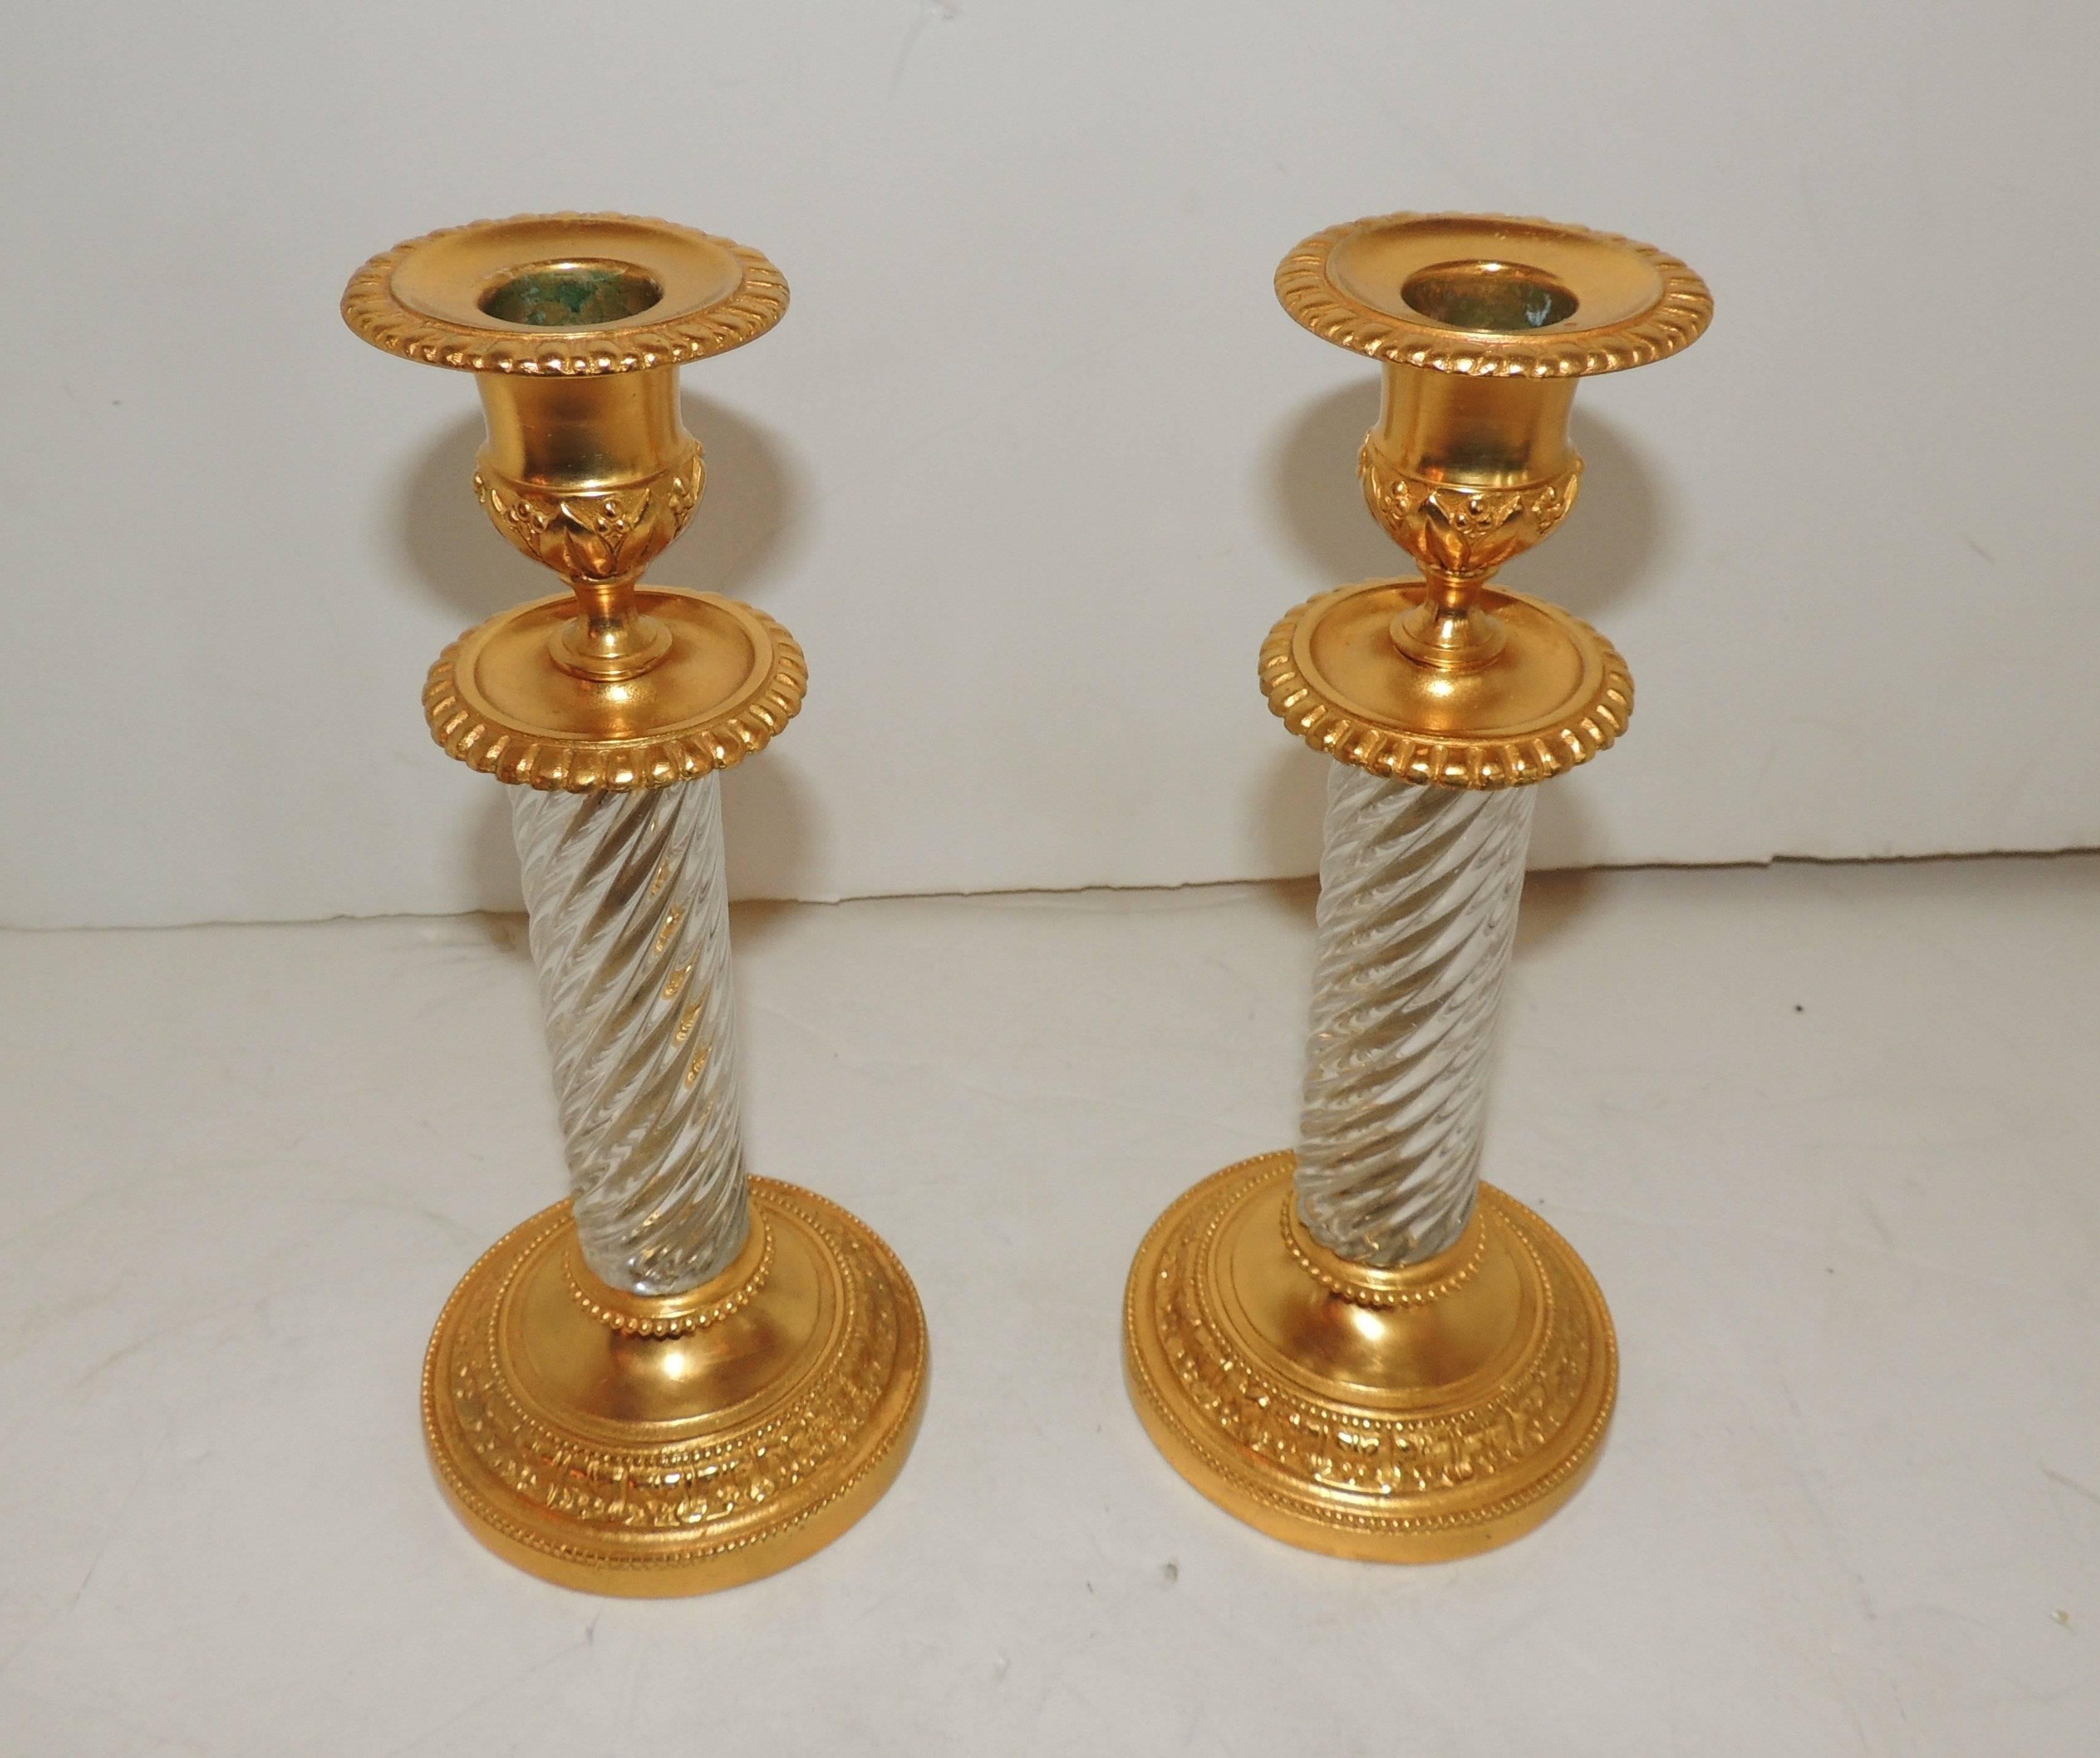 An elegant French Empire/neoclassical pair of doré bronze and cut crystal ormolu-mounted candlesticks.
In the manner of Baccarat.

Measures: 4.75" W x 11" H.